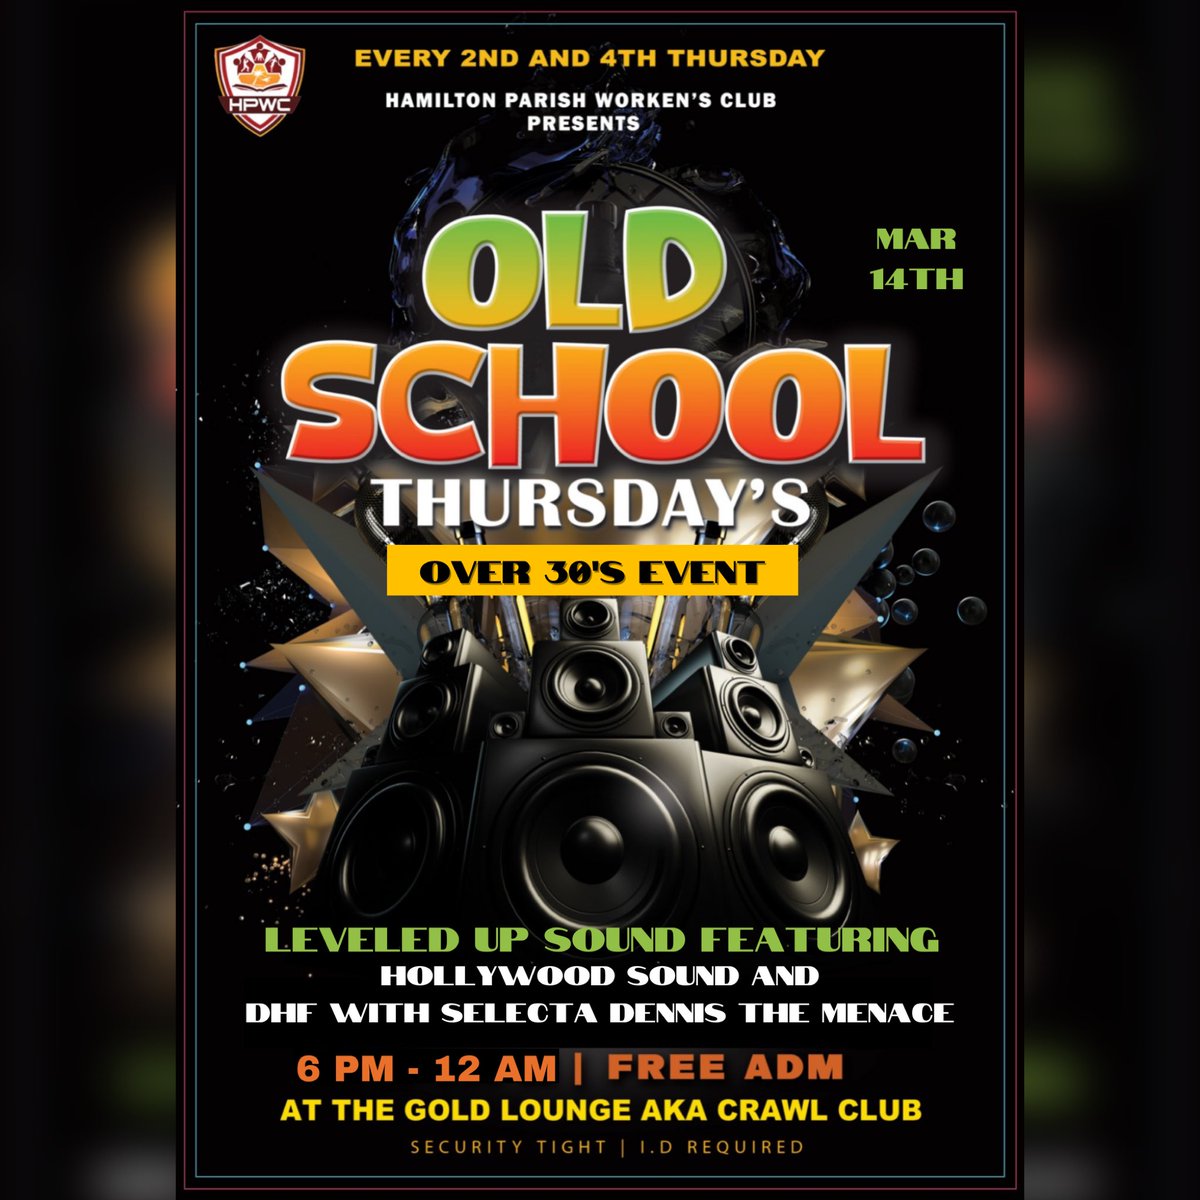 This Thursday the Old School Vibes are back at the Gold Lounge!

Make sure to bring good energy and get an early start to your weekend plans.

🎶 Music by Leveled Up Sound and Dennis the Menance of DHF 🤩 #hamiltonparishwc #hpwc #oldschoolthursday